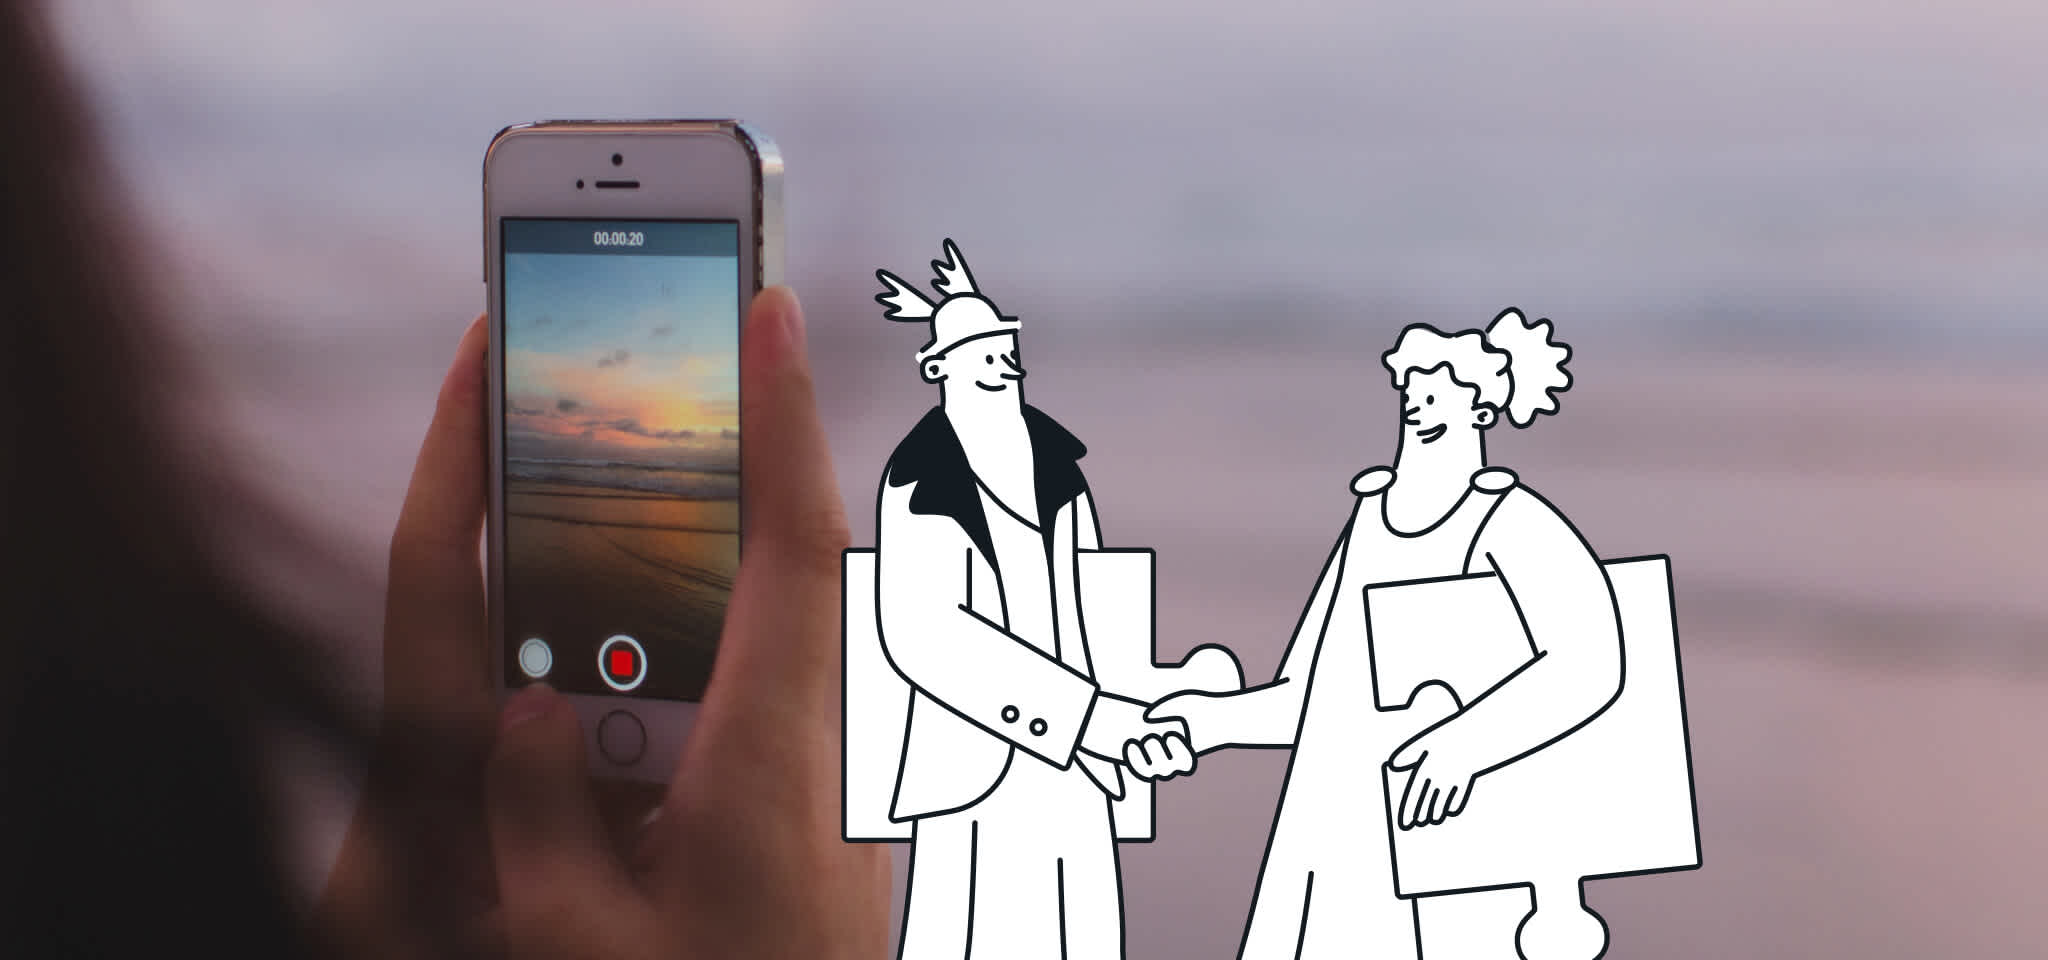 Hermes and a Goddess get to an agreement in front of a mobile phone